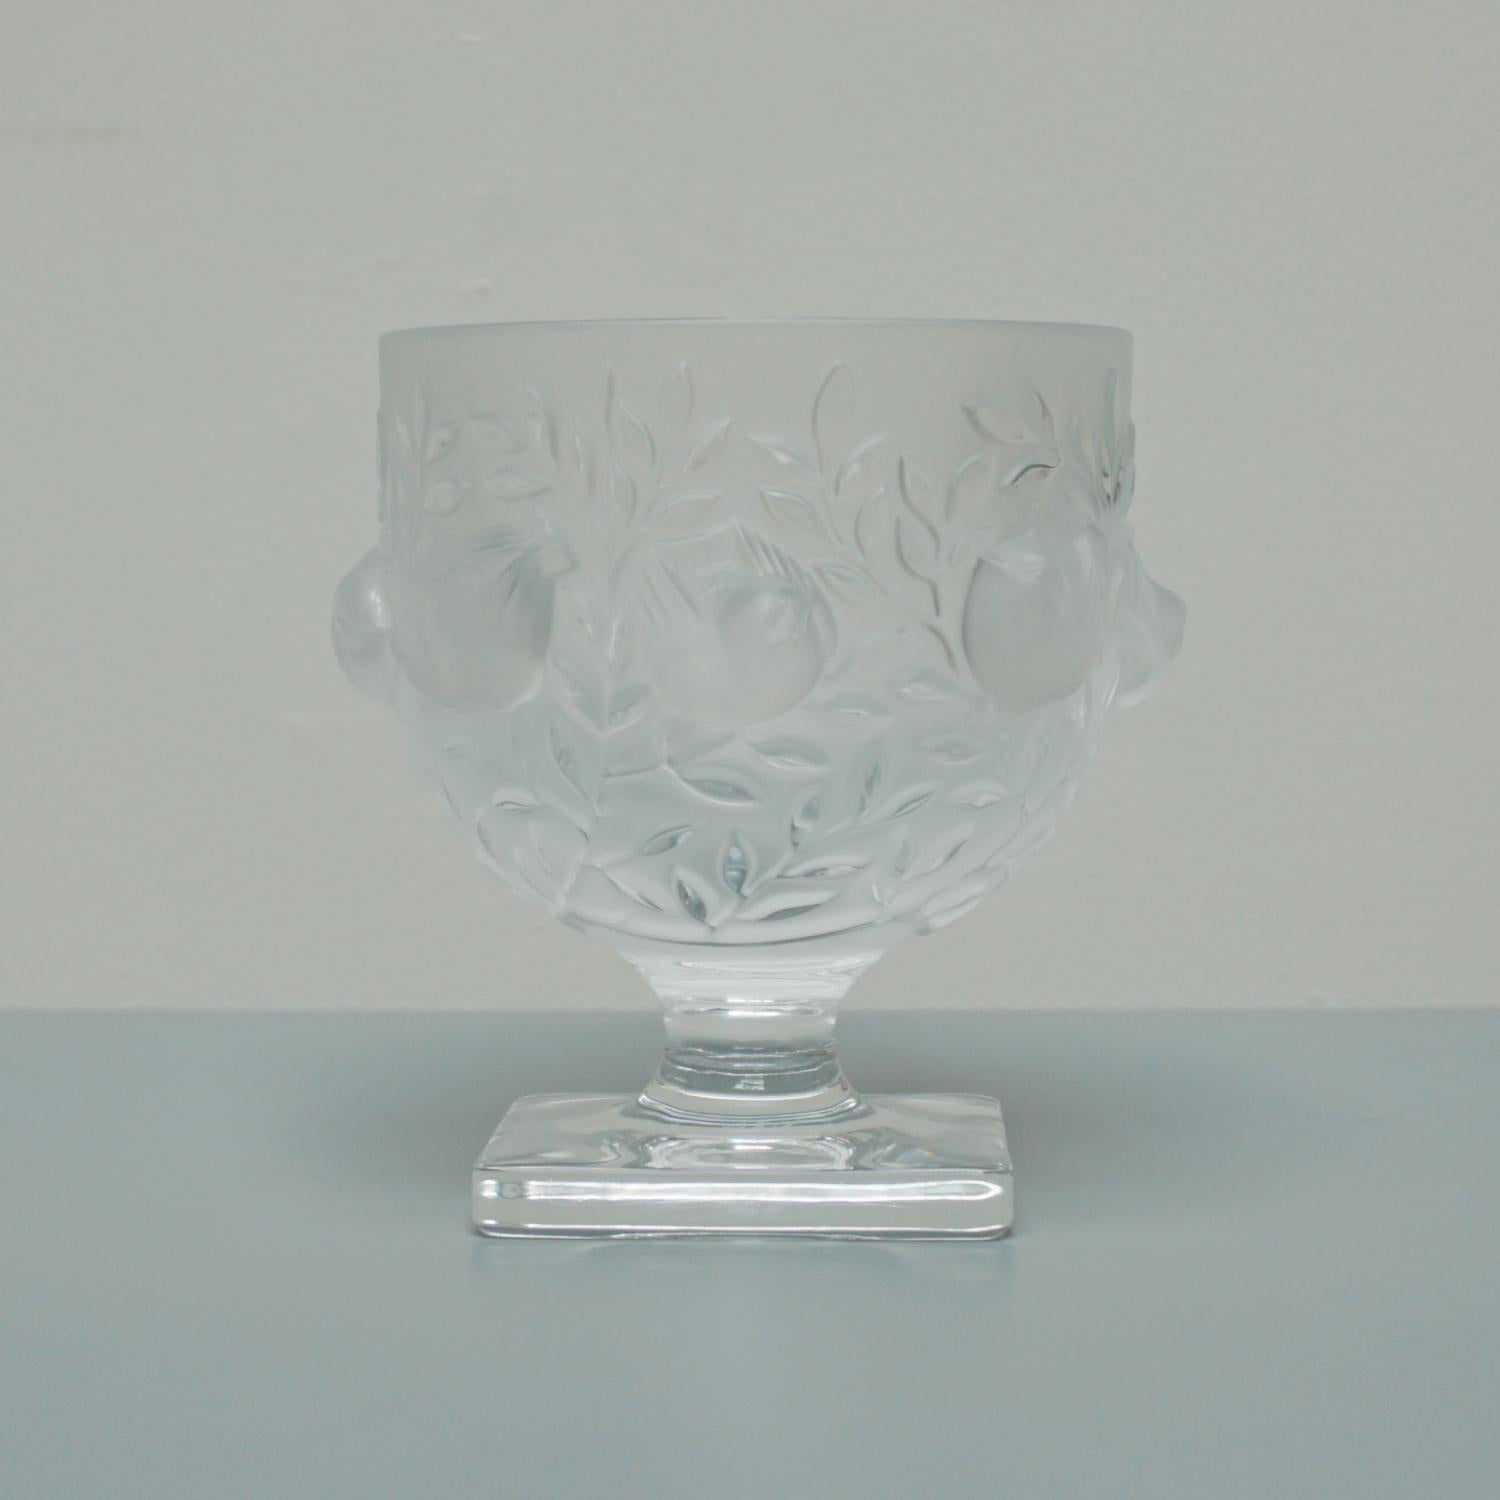 A clear crystal with satin finish vase by Marc Lalique. Sparrows nestle among foliage in carved in relief. Etched 'Lalique France' to base. Originally designed by Marc Lalique in 1961.

Dimensions: H 14cm W 12cm

Origin: France 

Date: Circa